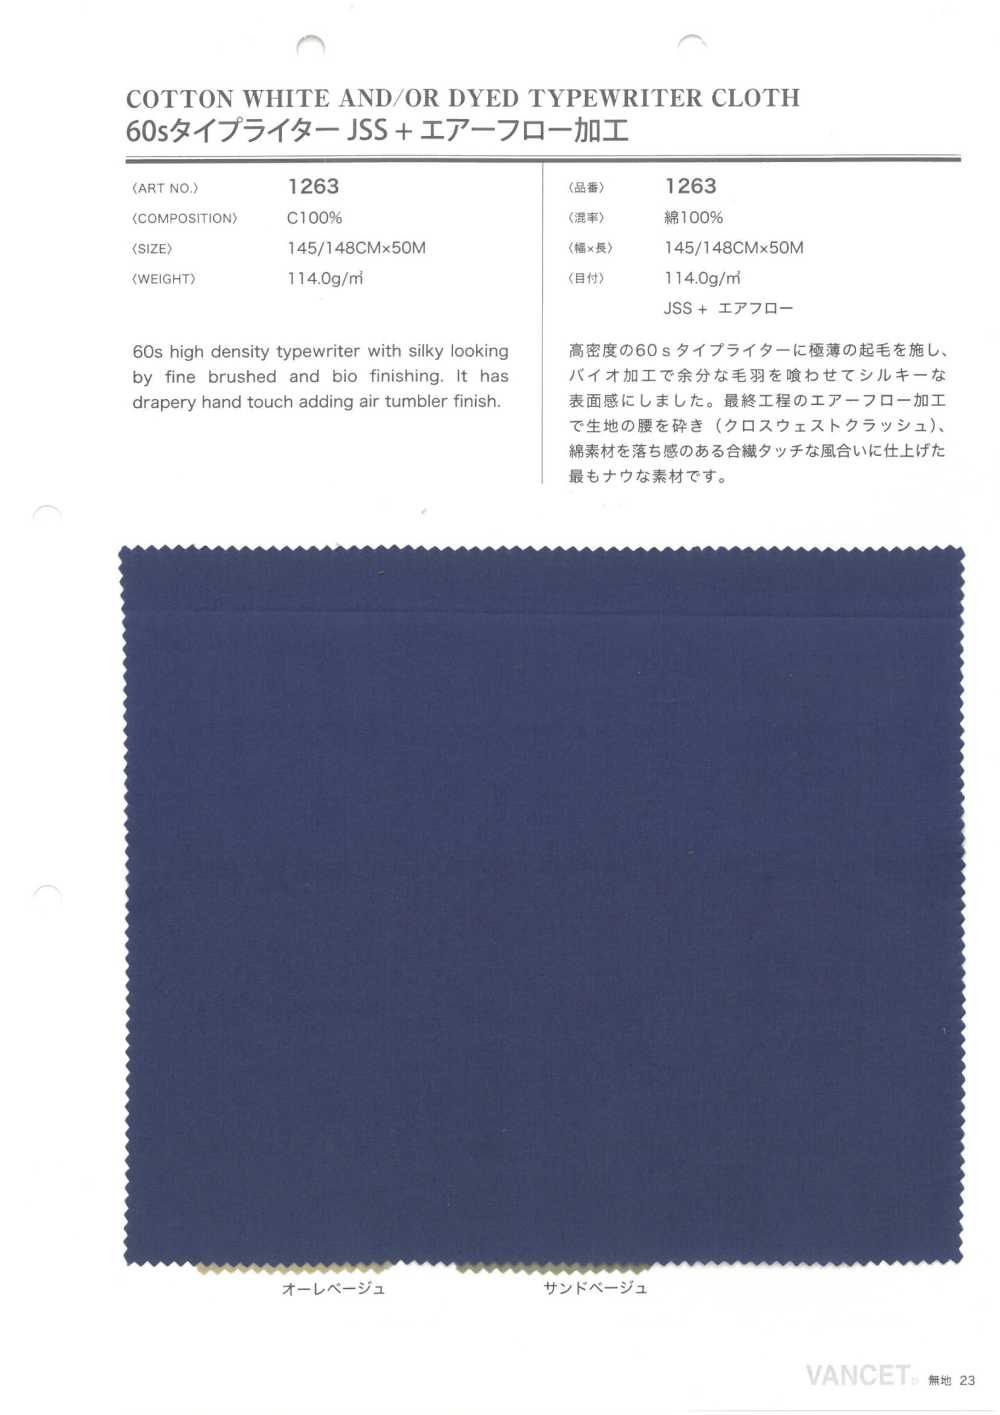 1263 60 Single Thread Typewritter Cloth JSS + Air Flow Processing[Textile / Fabric] VANCET